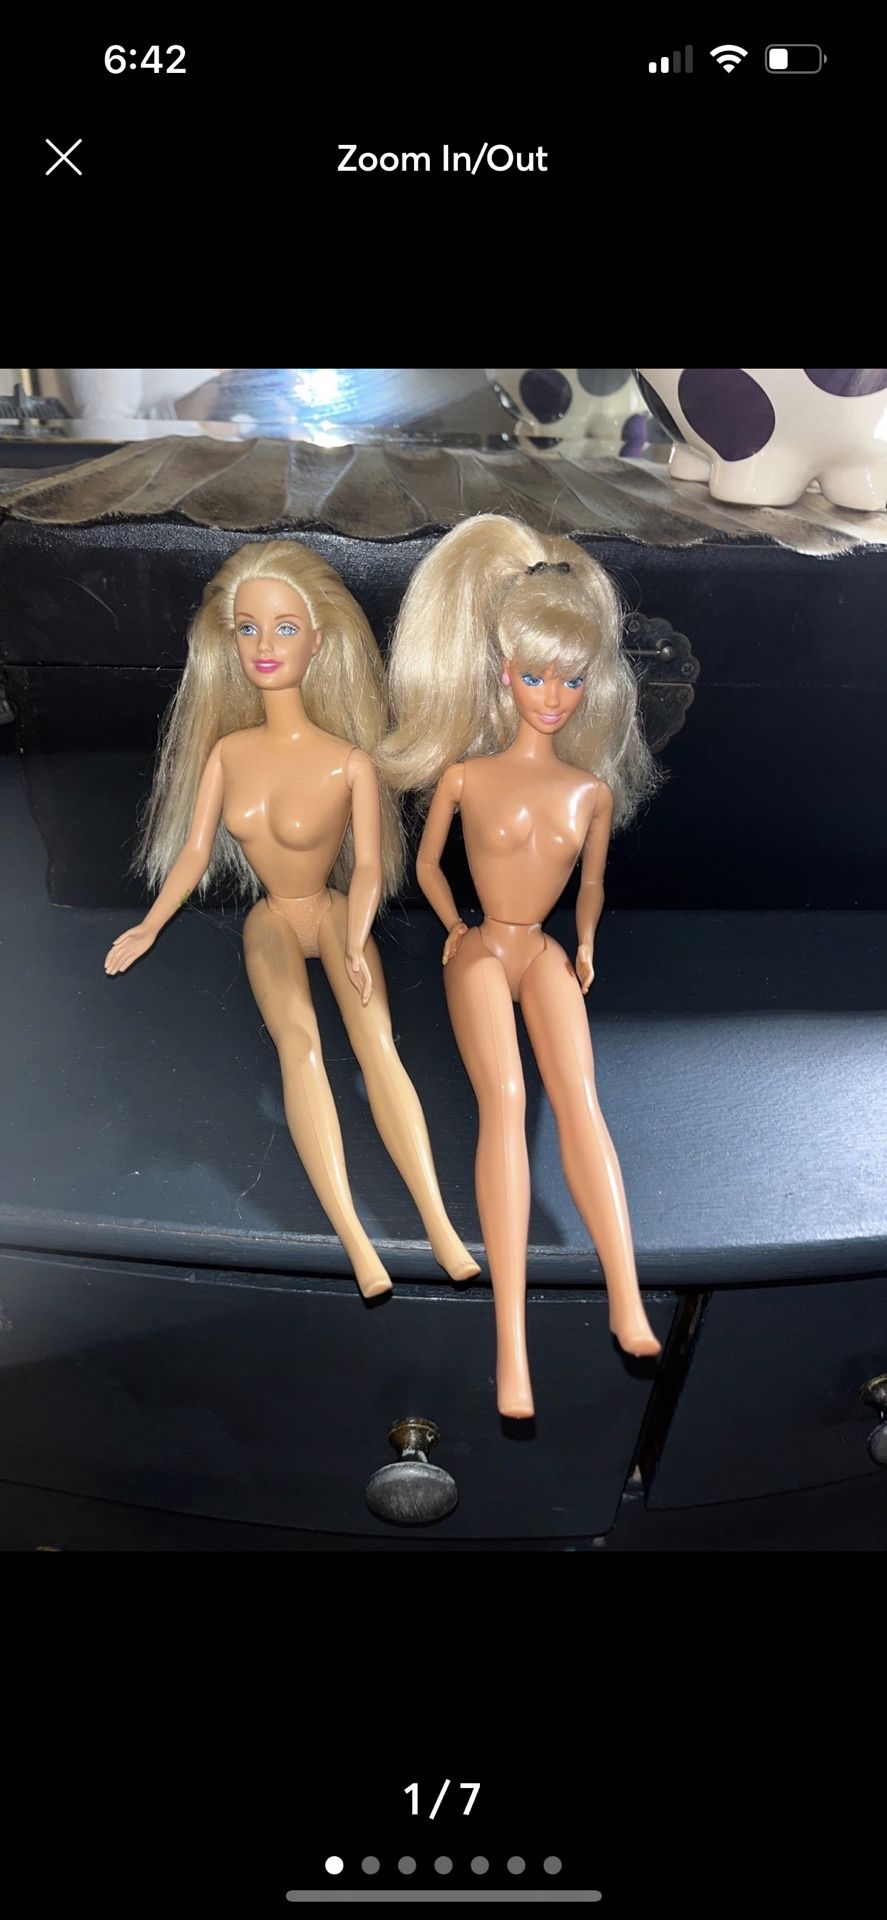 Barbies 1966 twist and turn bendable knees blonde Mattel Indonesia Malaysia